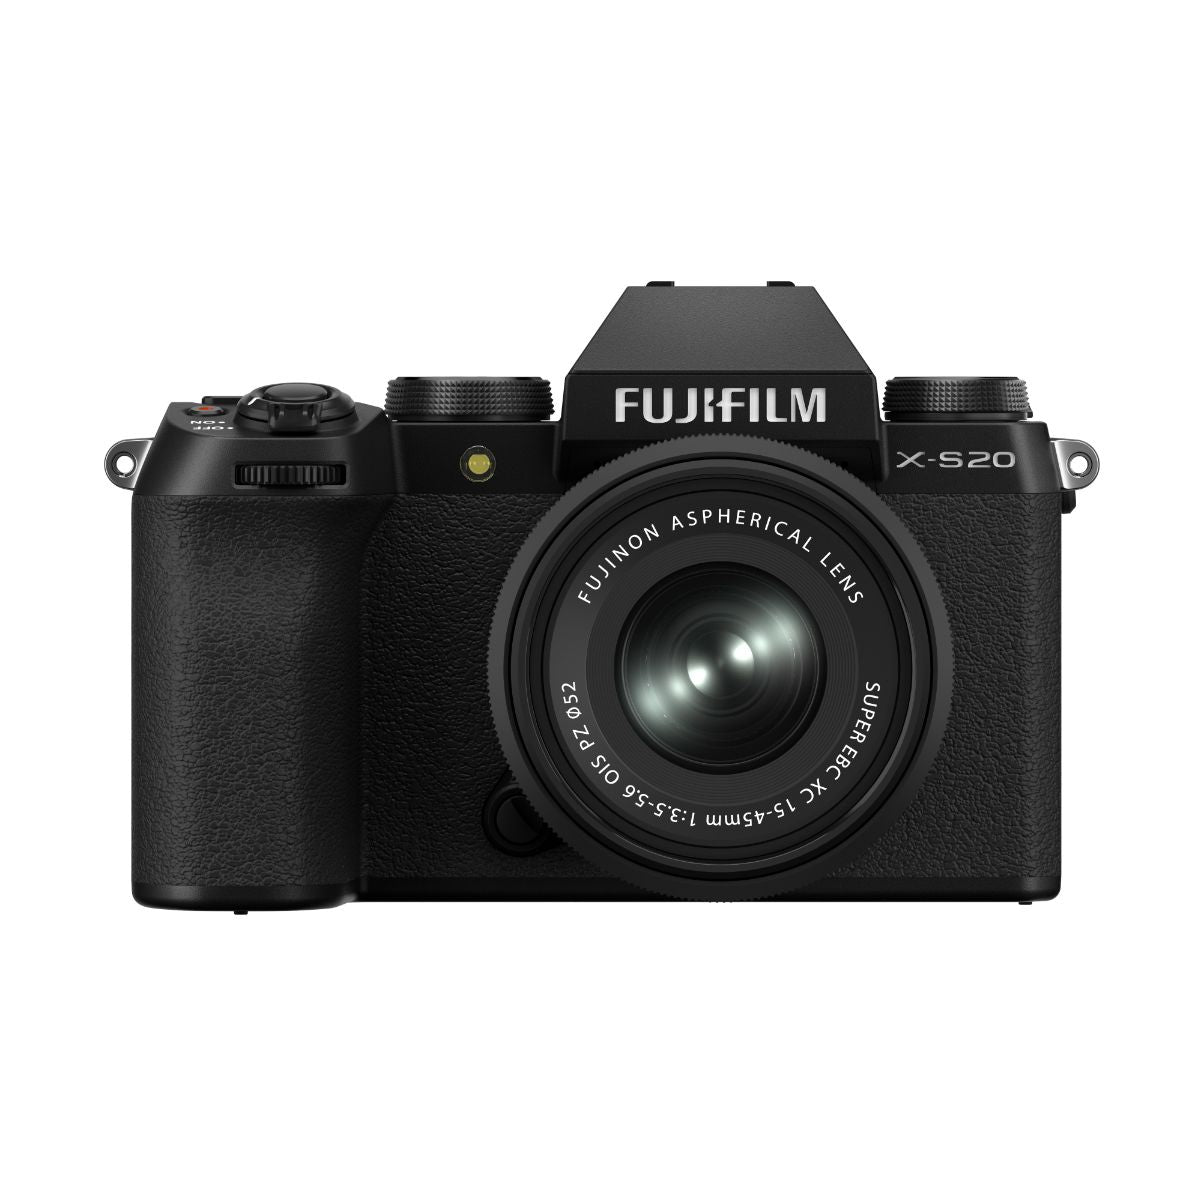 Product Image of Fujifilm X-S20 mirrorless camera with XC 15-45mm F3.5-5.6 OIS PZ lens - Black